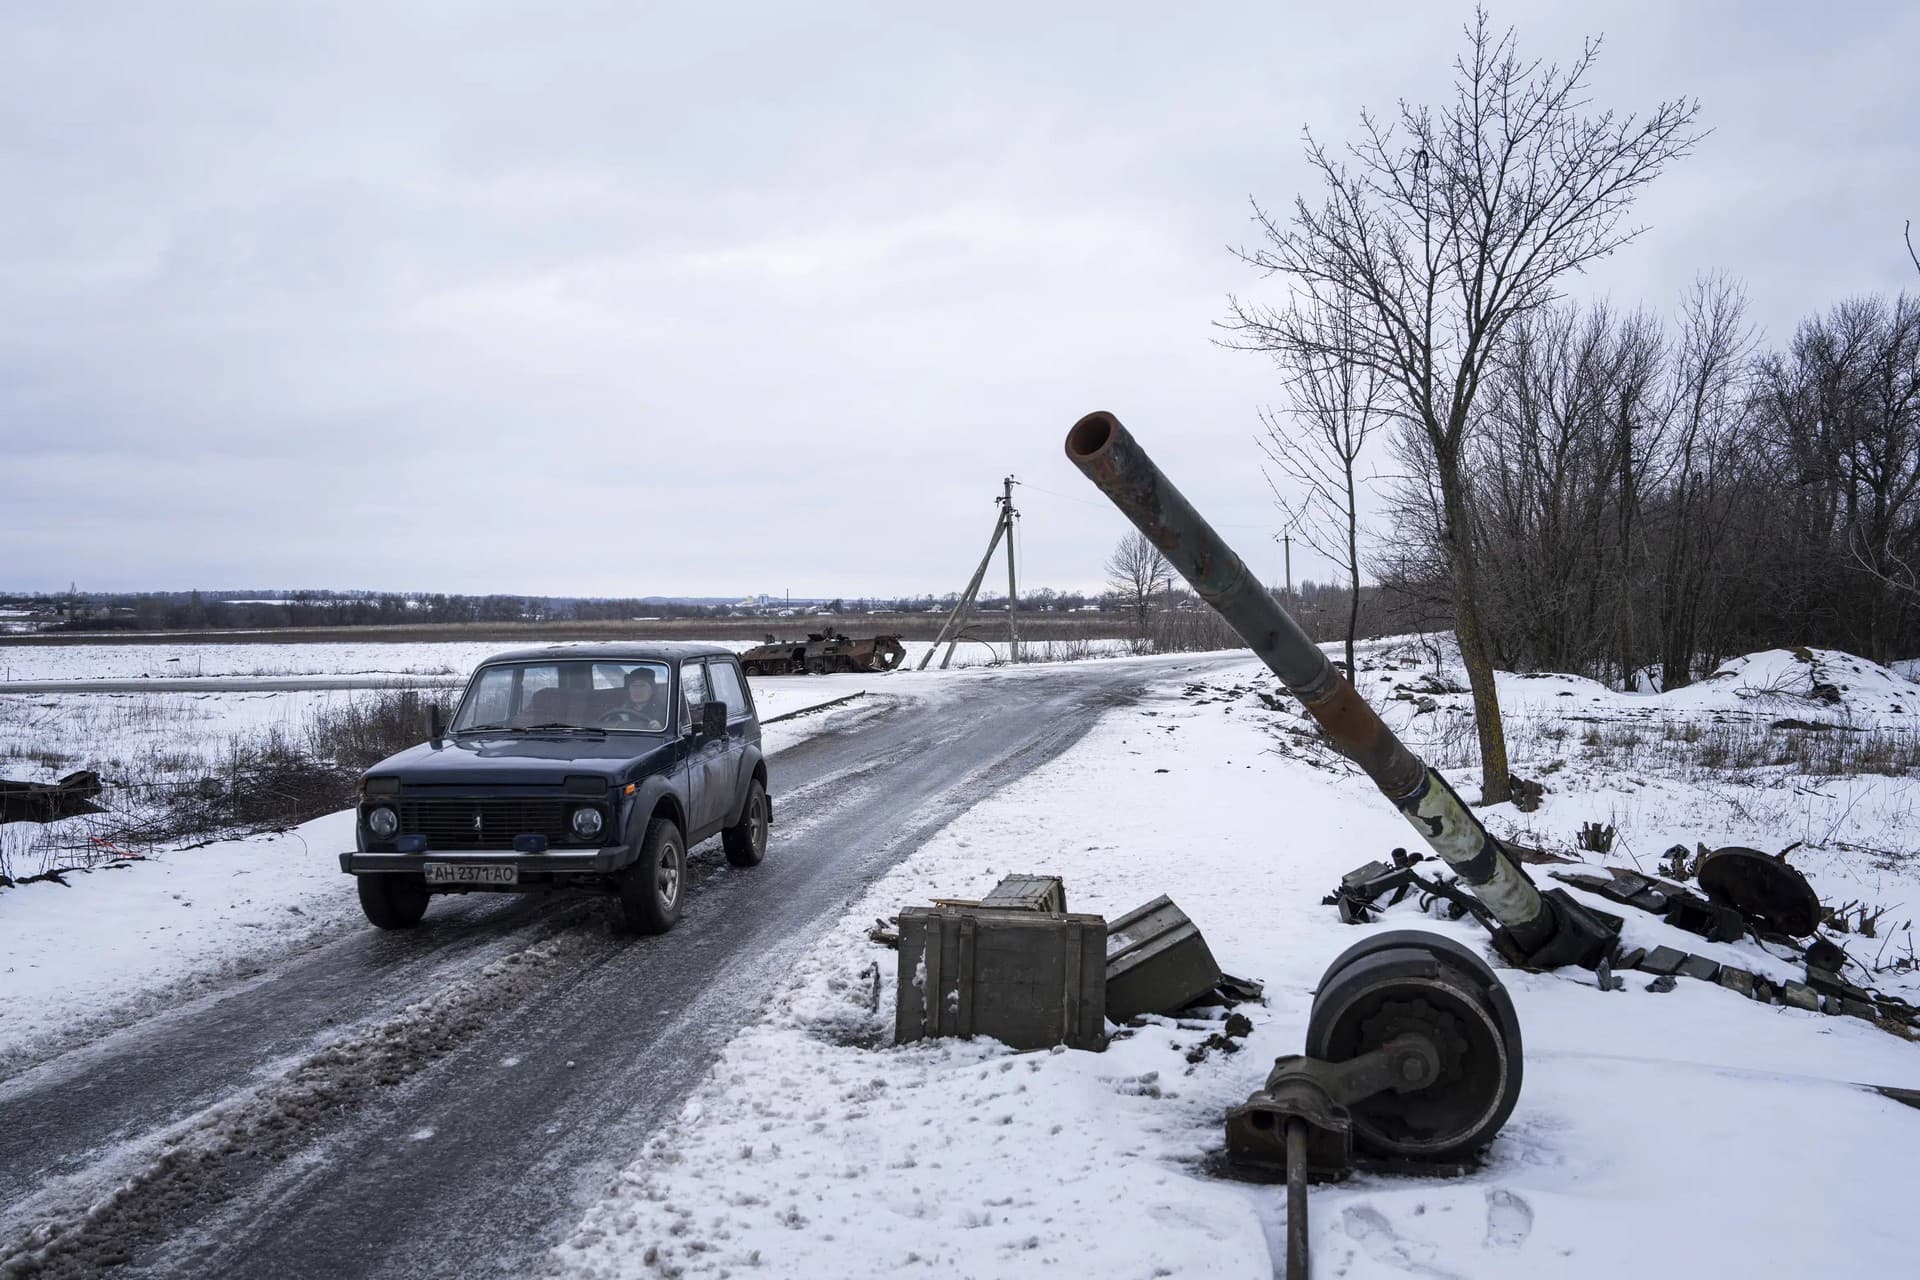 A car drives past a destroyed tank at the former positions of Russian forces in Ridkodub village